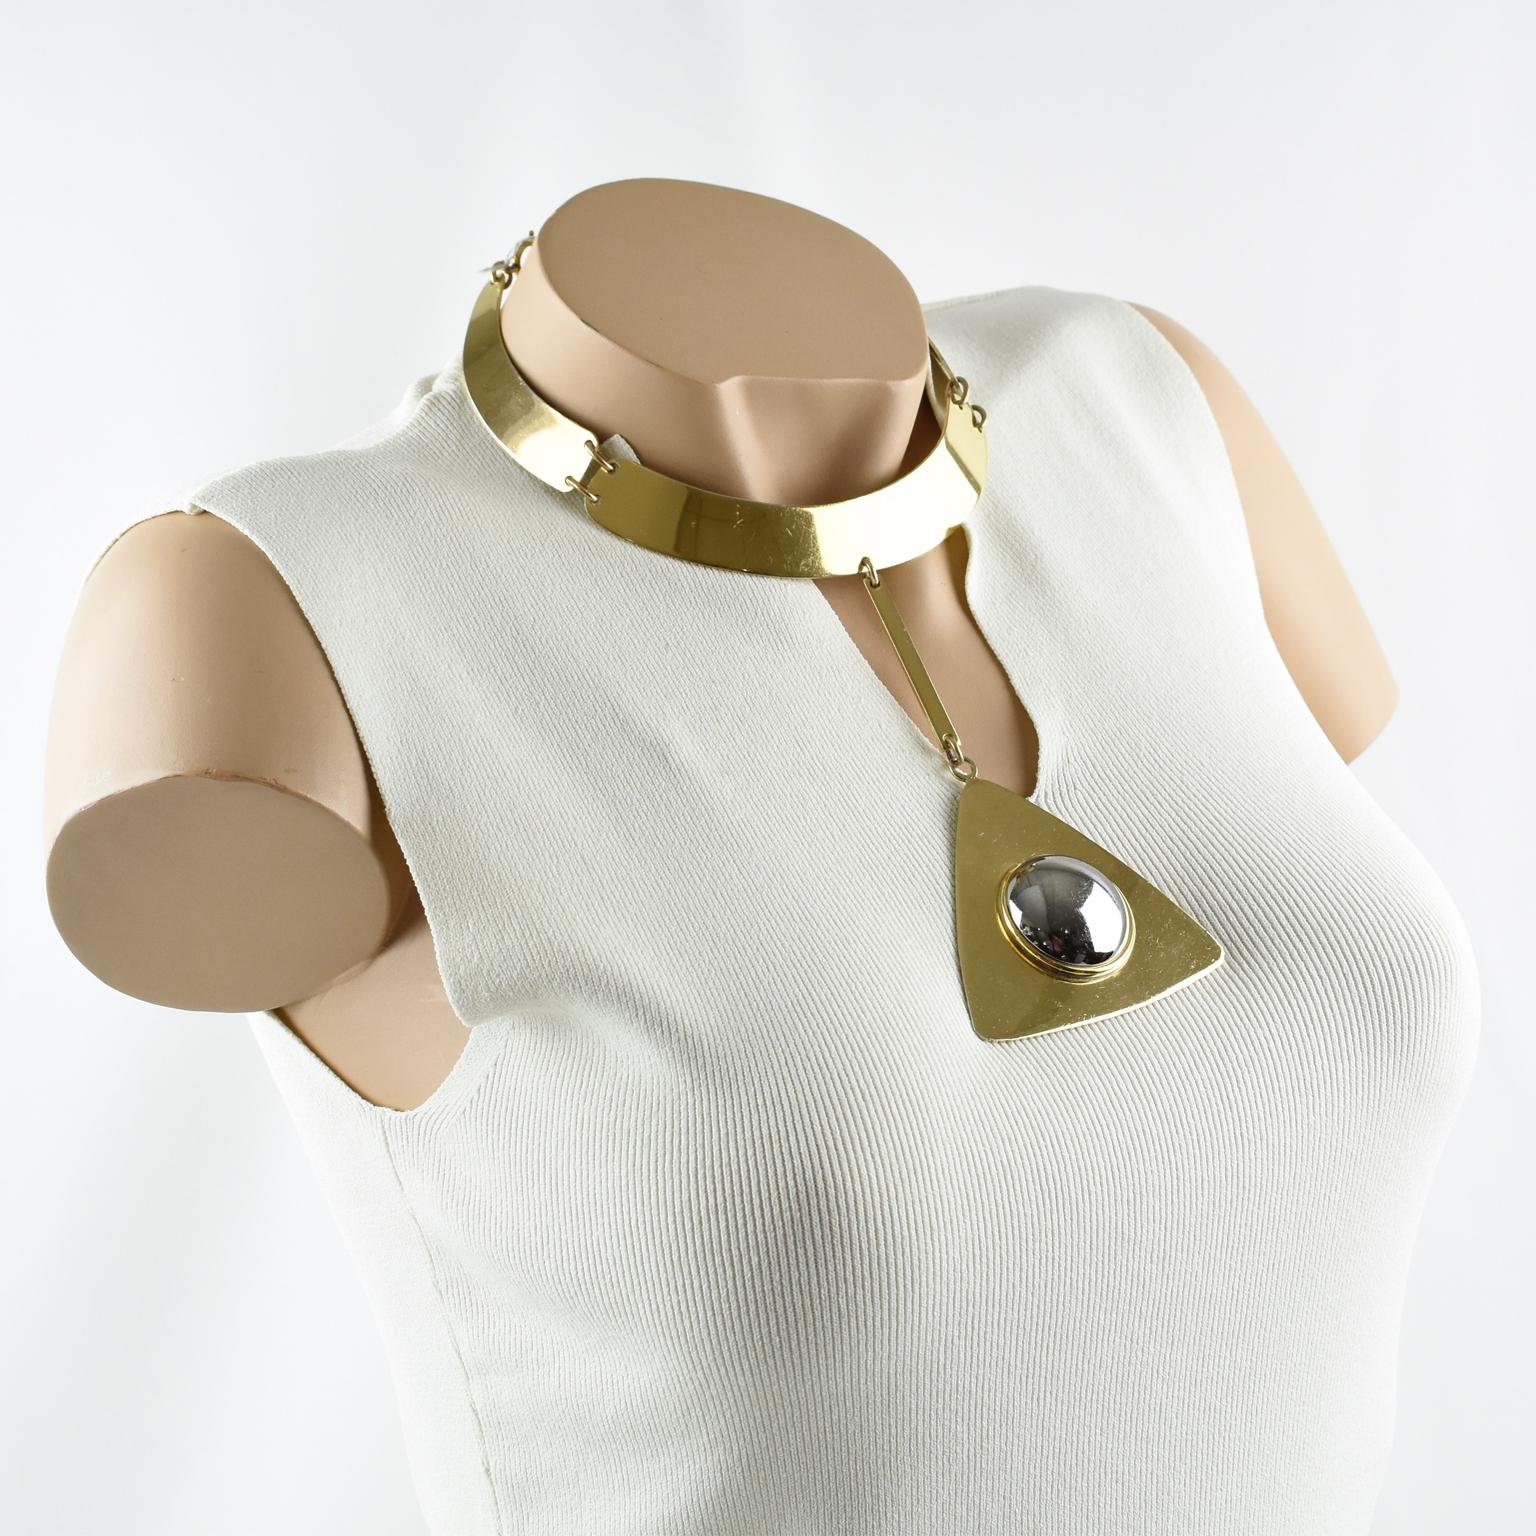 Stunning rare modernist Pierre Cardin Paris signed Necklace. Featuring a cool Space Age 1960s design articulated rigid gilt metal collar with extra long gilt metal geometric pendant medallion. Metal medallion is dimensional and articulated with